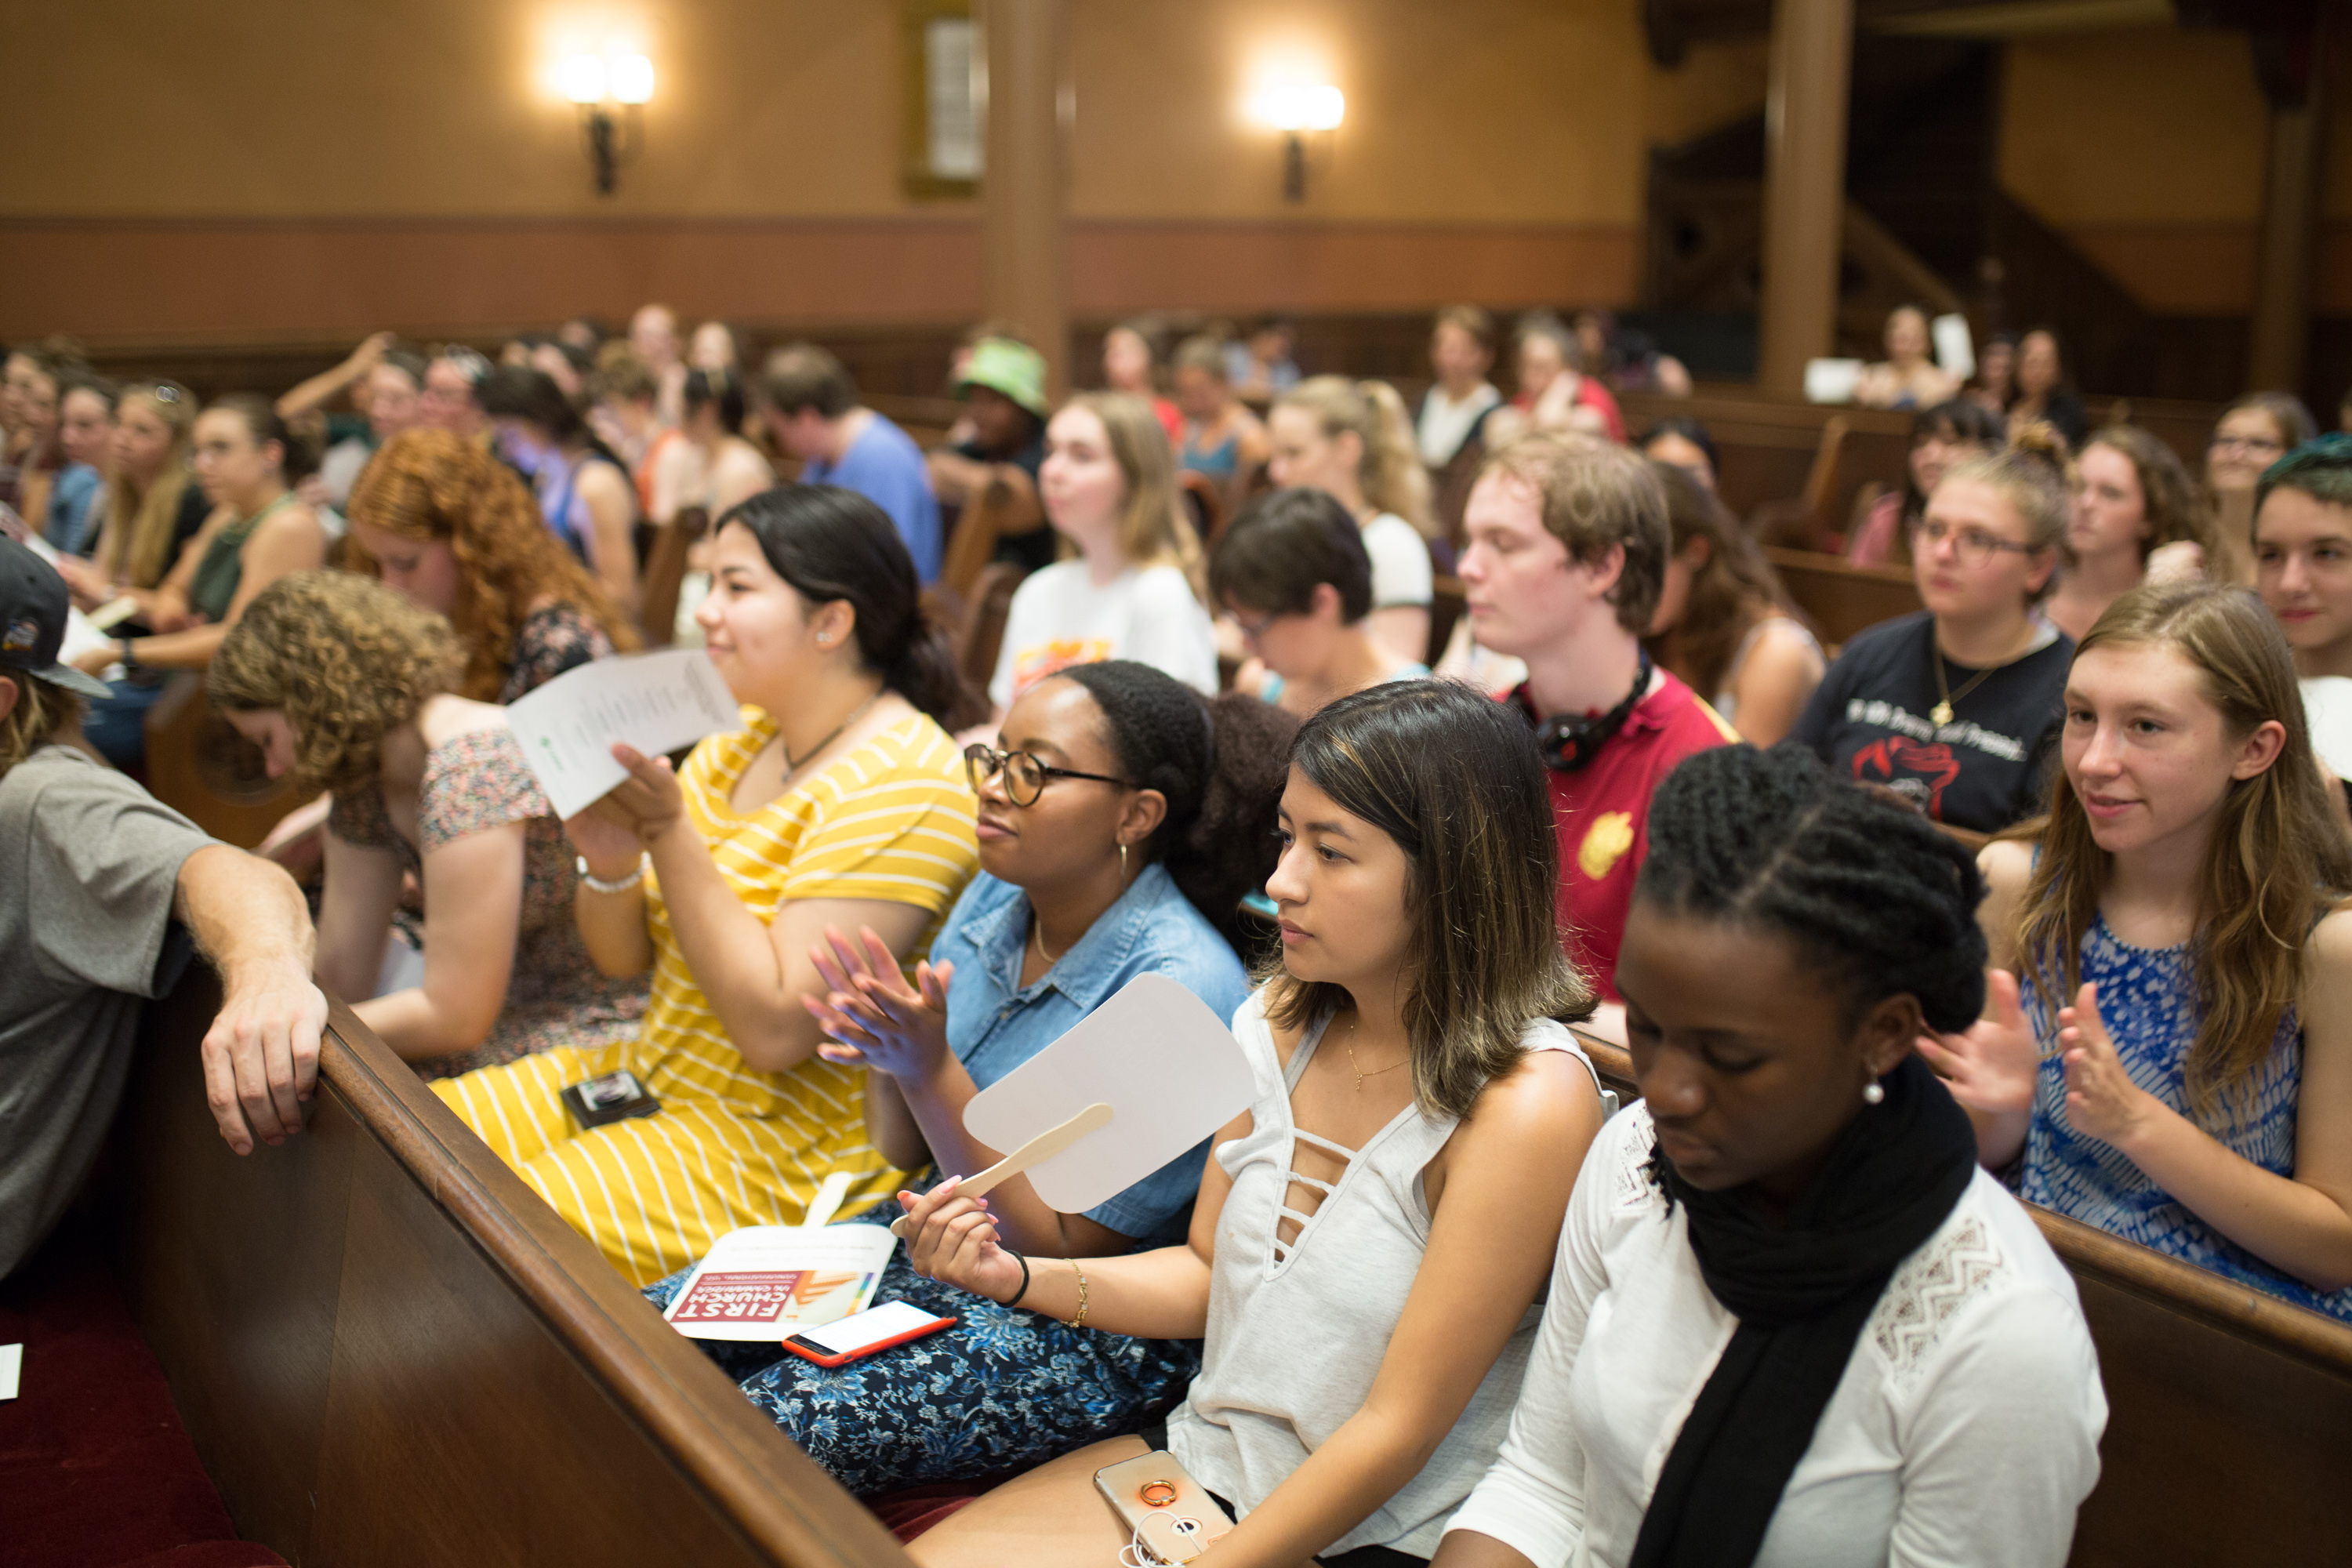 Students sitting in church pews at convocation